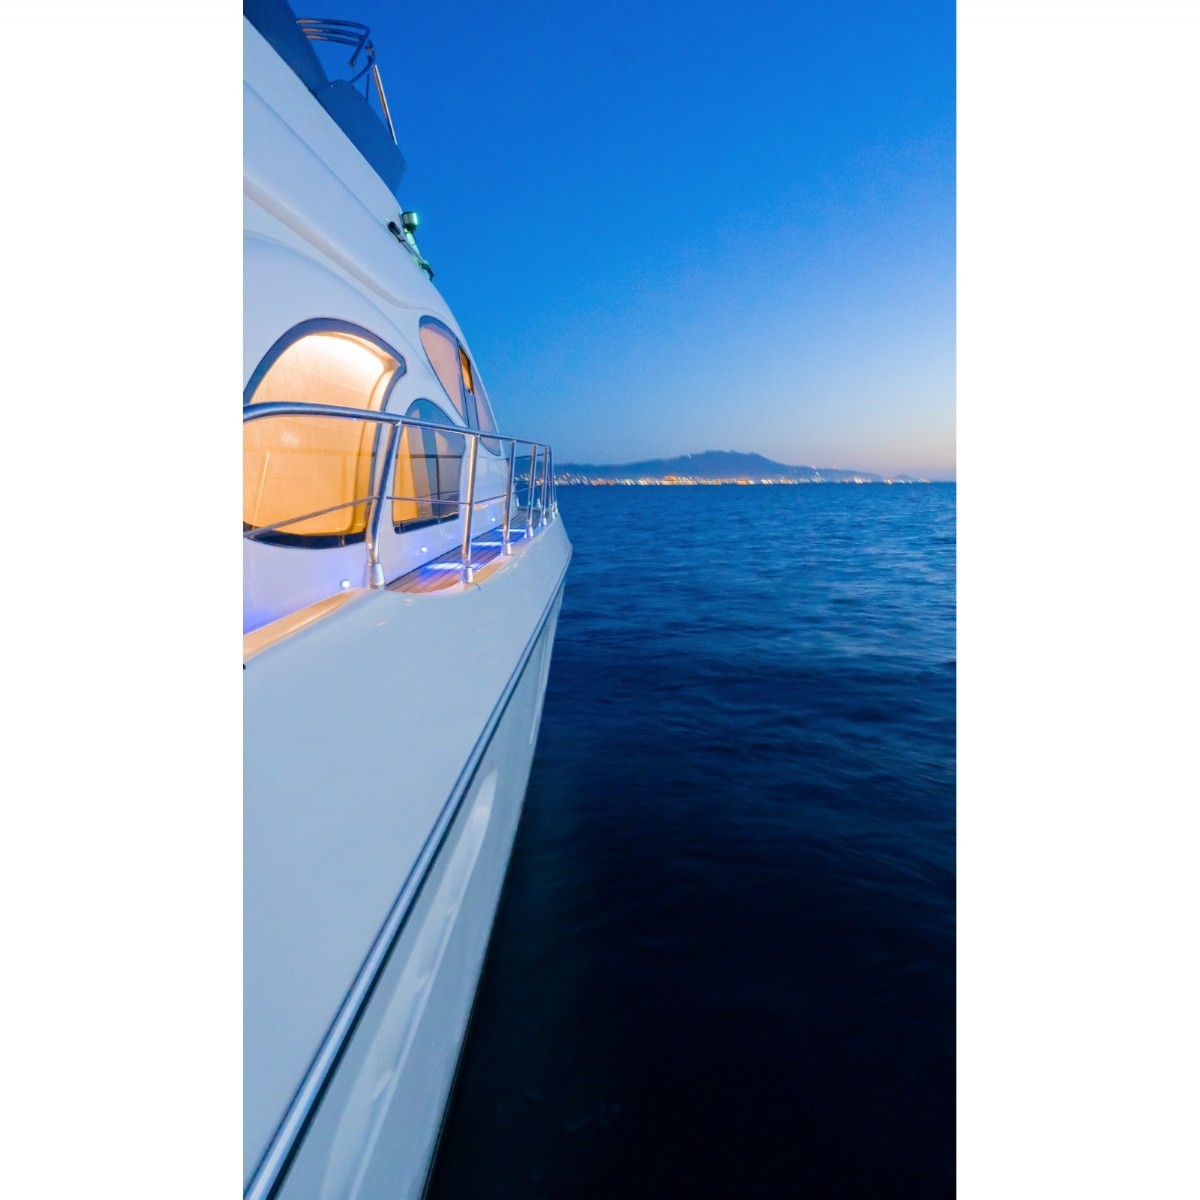 Our Boats | Yacht Charter Turkey M344 Luxury Motoryacht For Rent 6 People | M344  | private motoryacht rental, luxury yacht hire, Yacht charter Turkey, Gulet charter, gulet rental Turkey, yacht rentals Turkey, luxury boat charter Turkey, Bodrum motoryacht charter, rental motoryacht bodrum, luxury motoryacht, Zeynep Lina | 